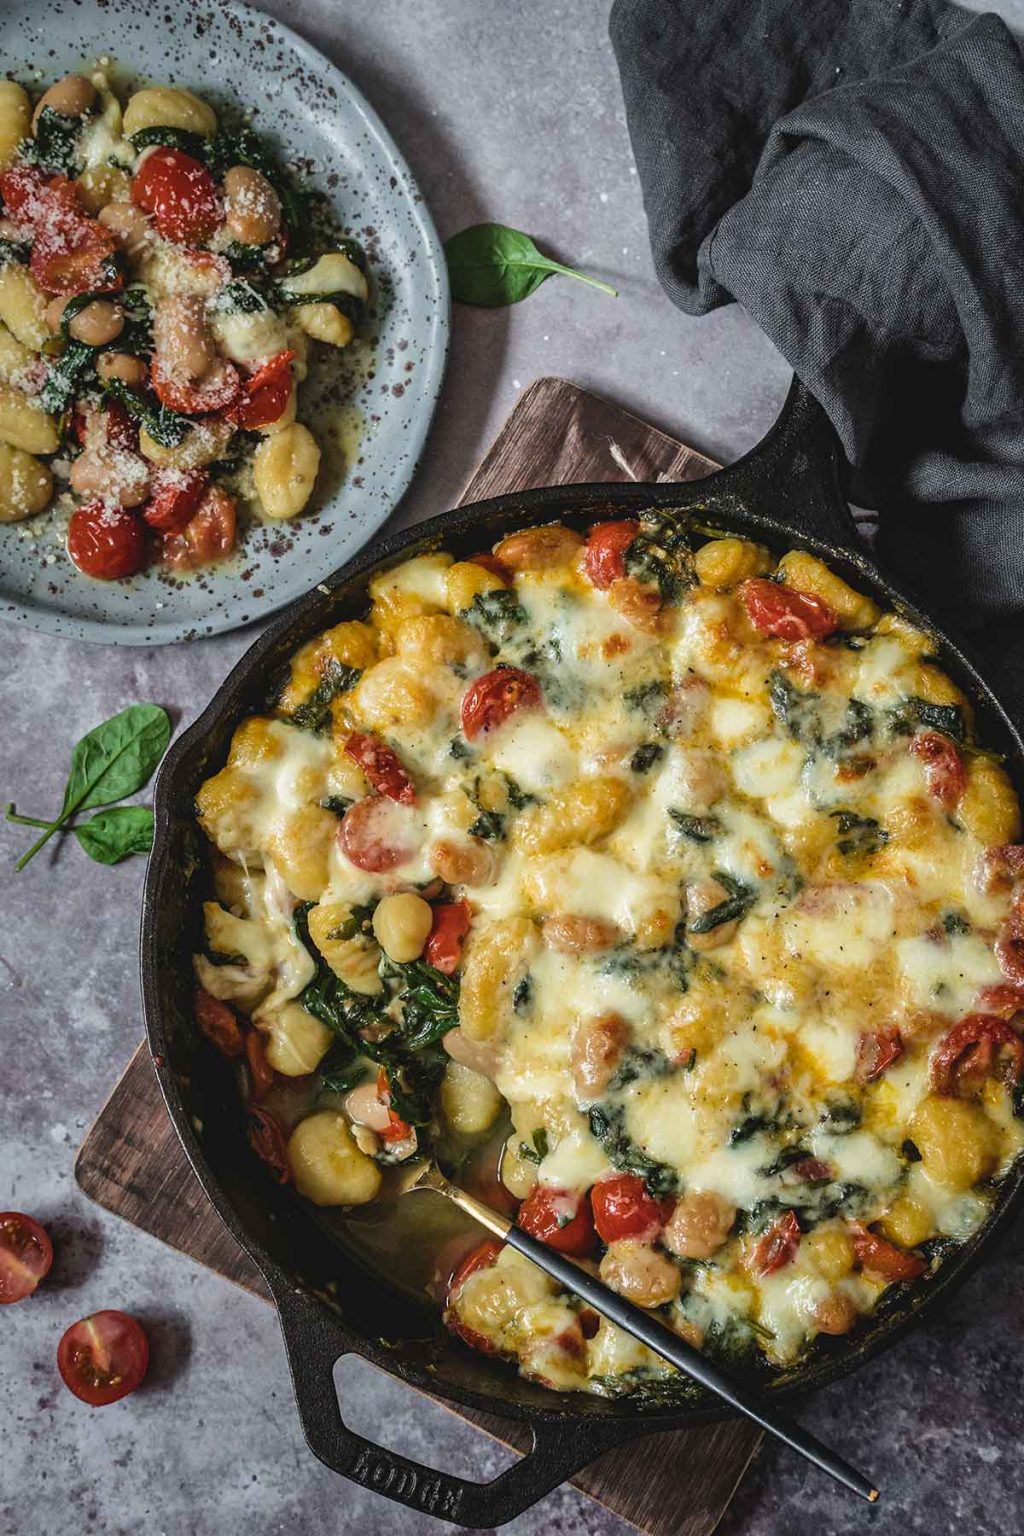 Baked Gnocchi with Spinach, Tomatoes, and Beans - Easy and Healthy!